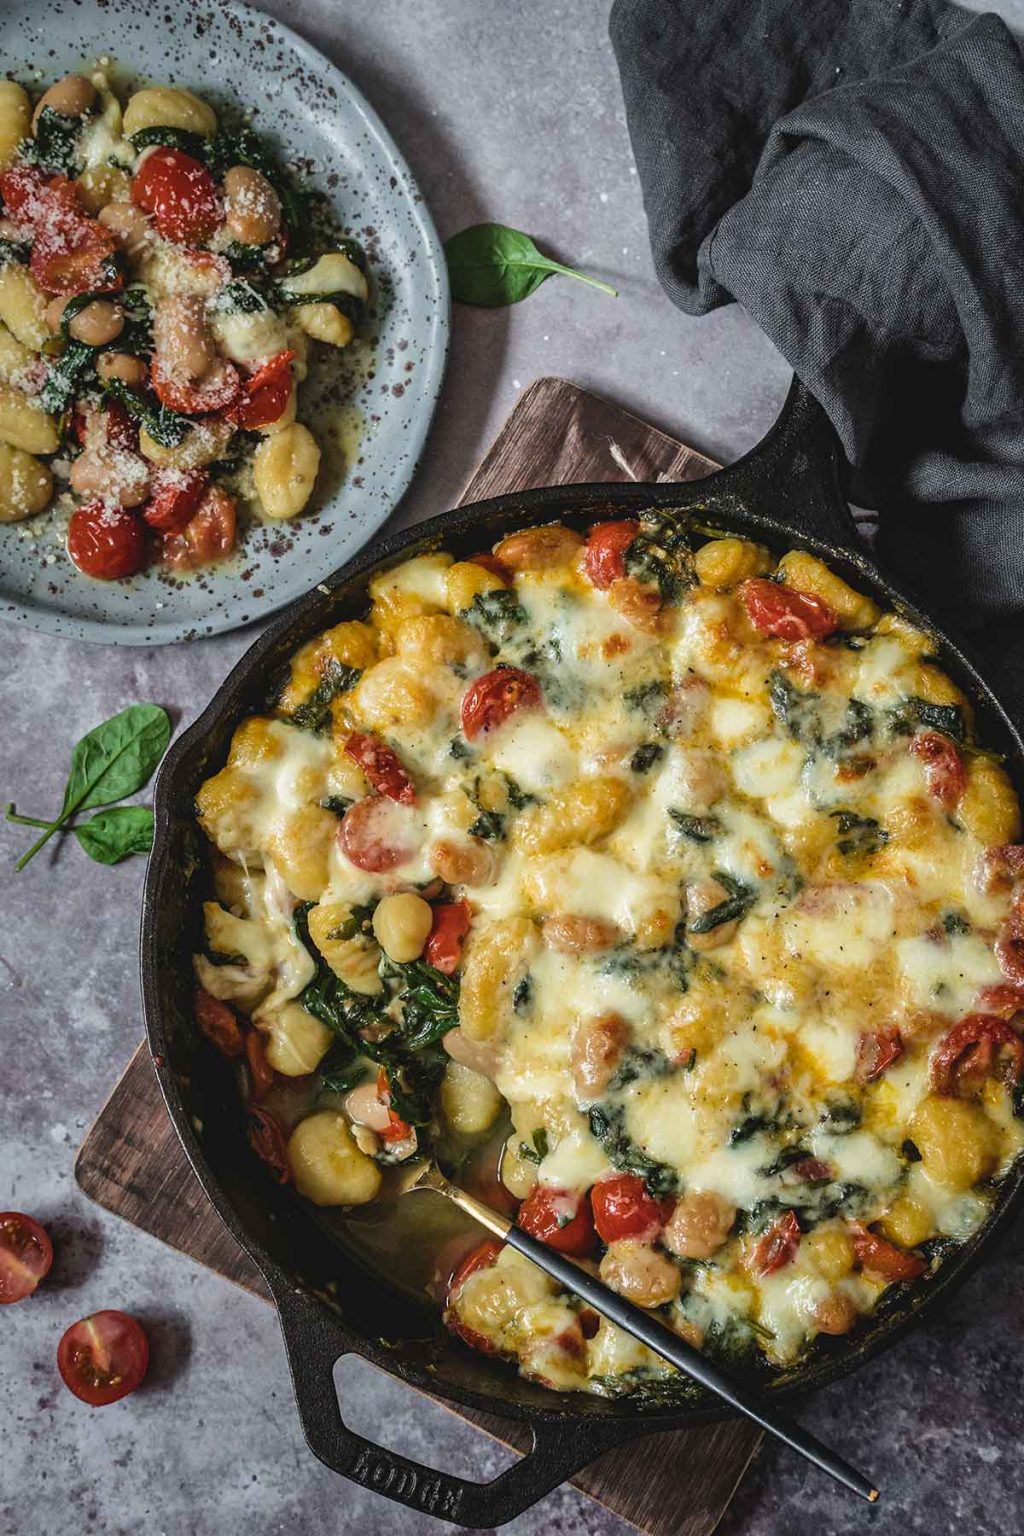 Baked Gnocchi with Spinach, Tomatoes, and Beans - Easy and Healthy!